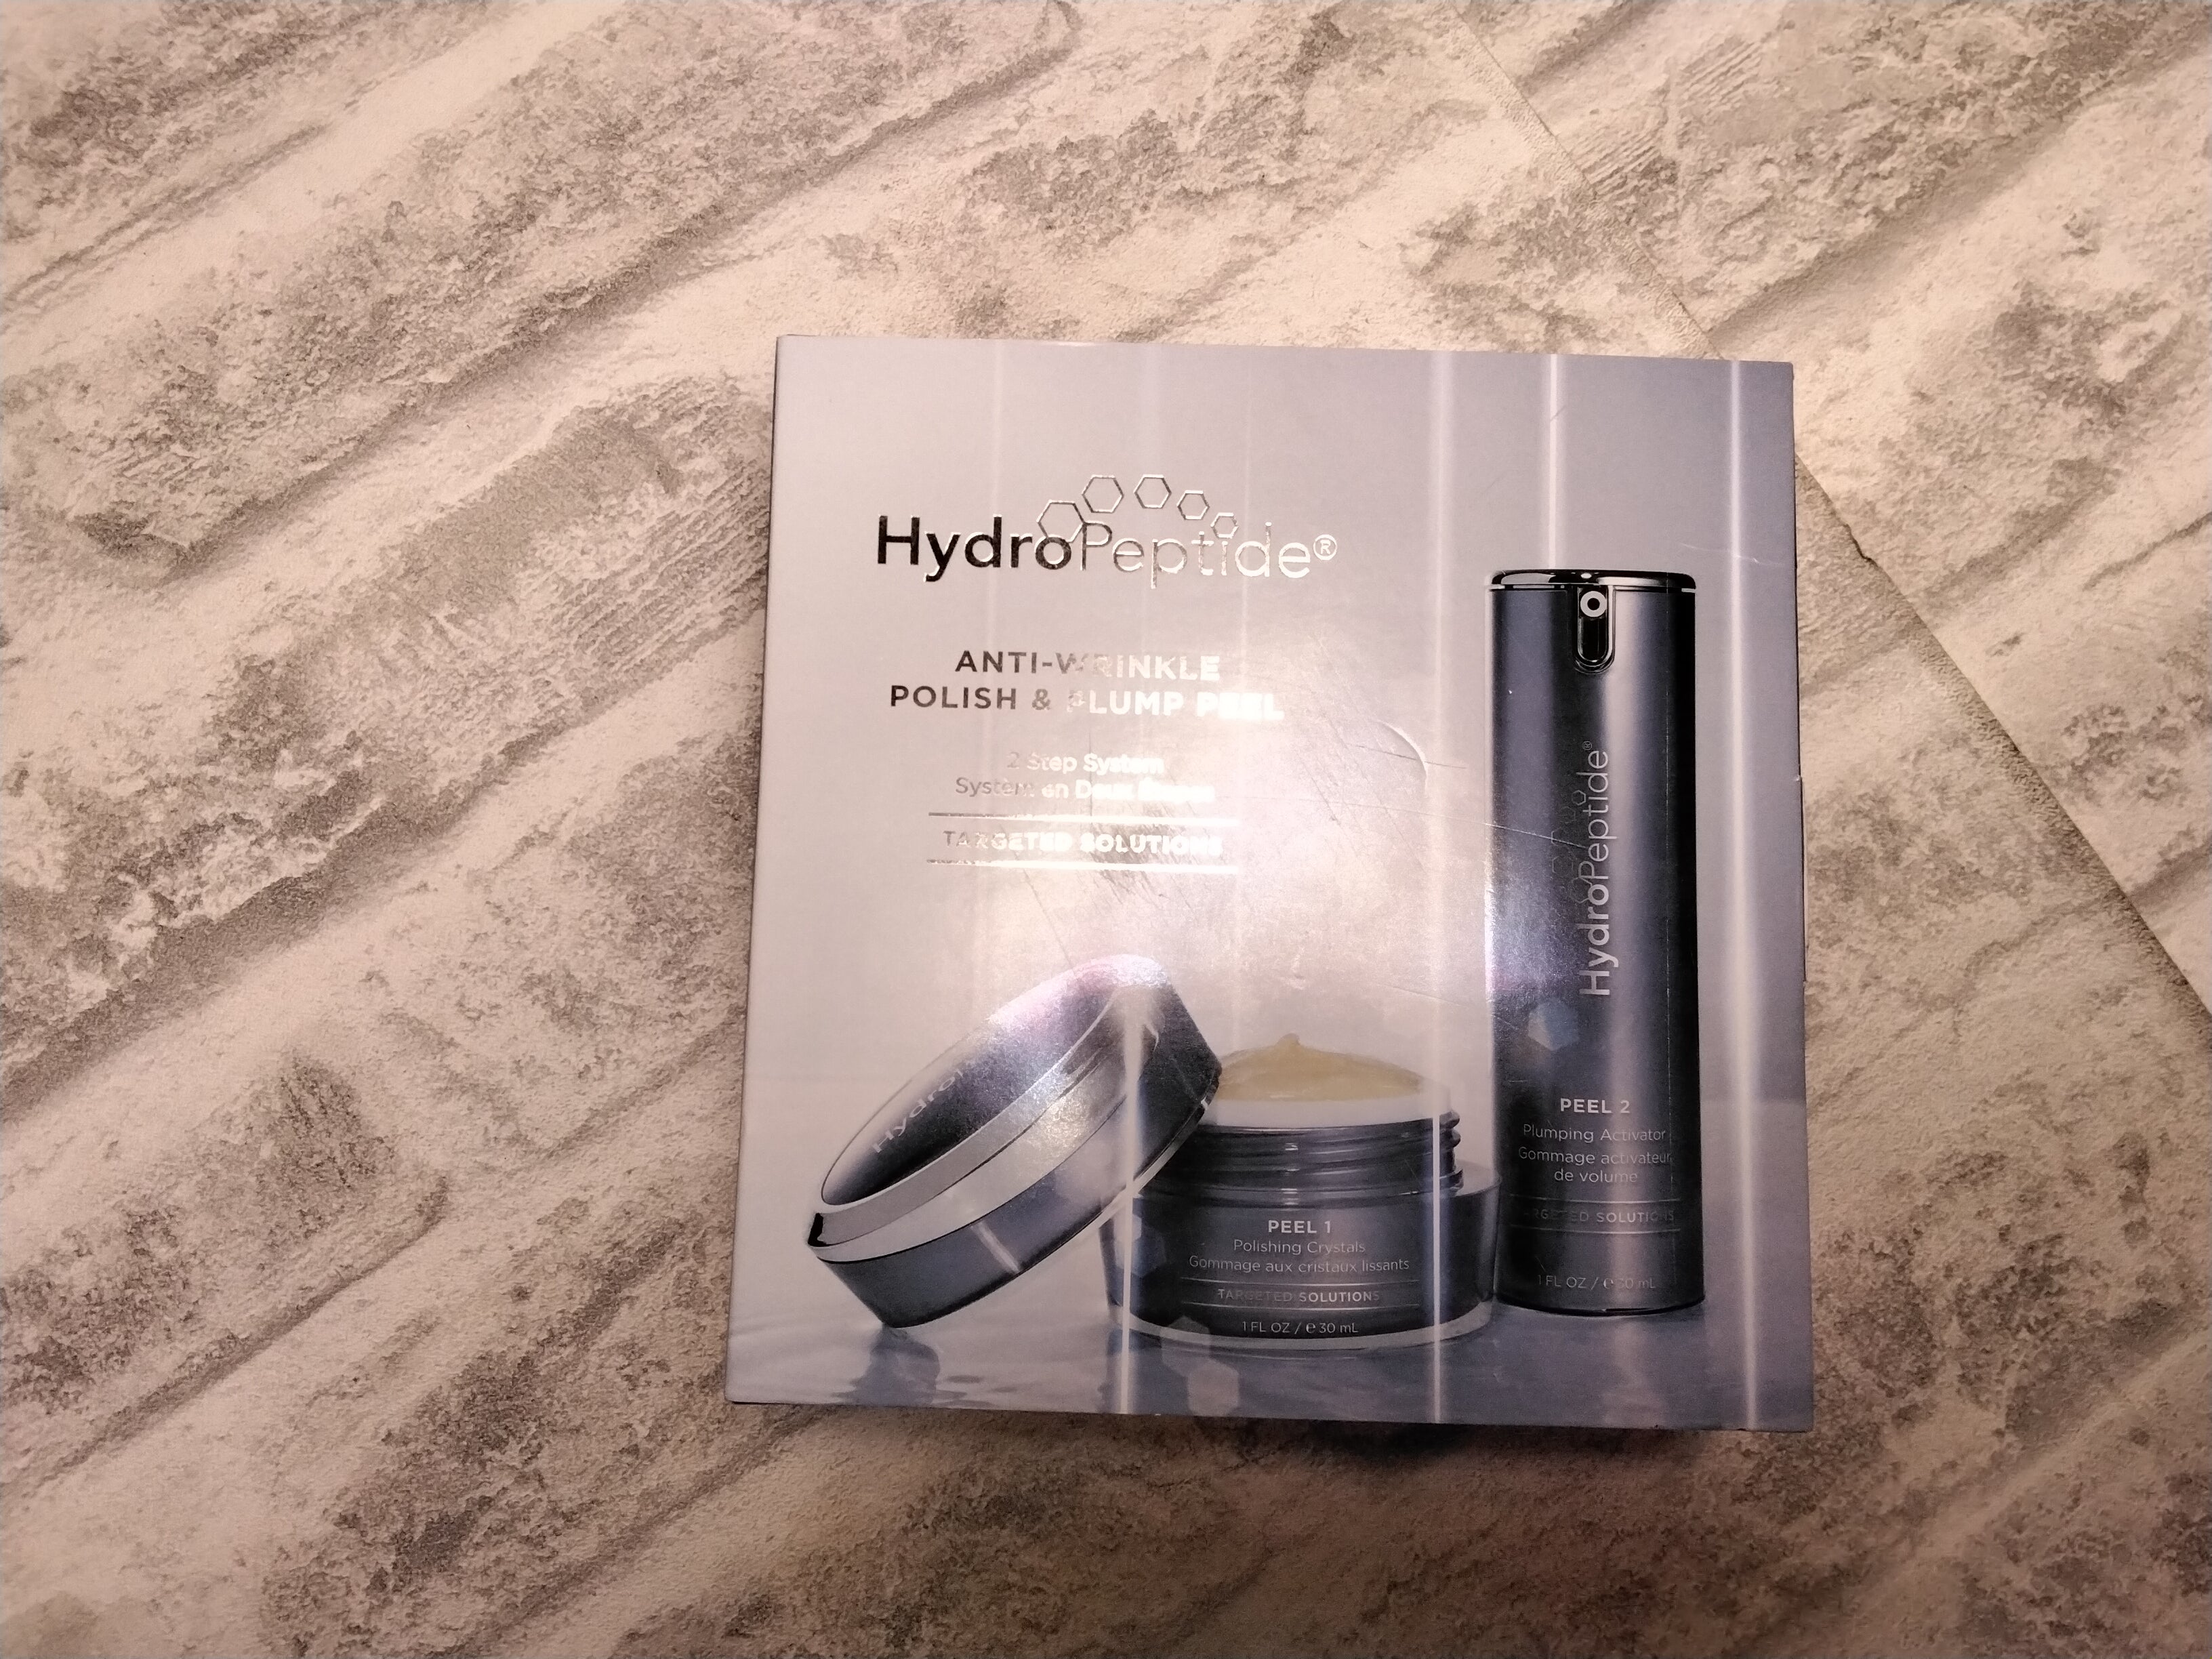 HydroPeptide Polish & Plump Face Peel Radiant Two-Step System (7619948544238)